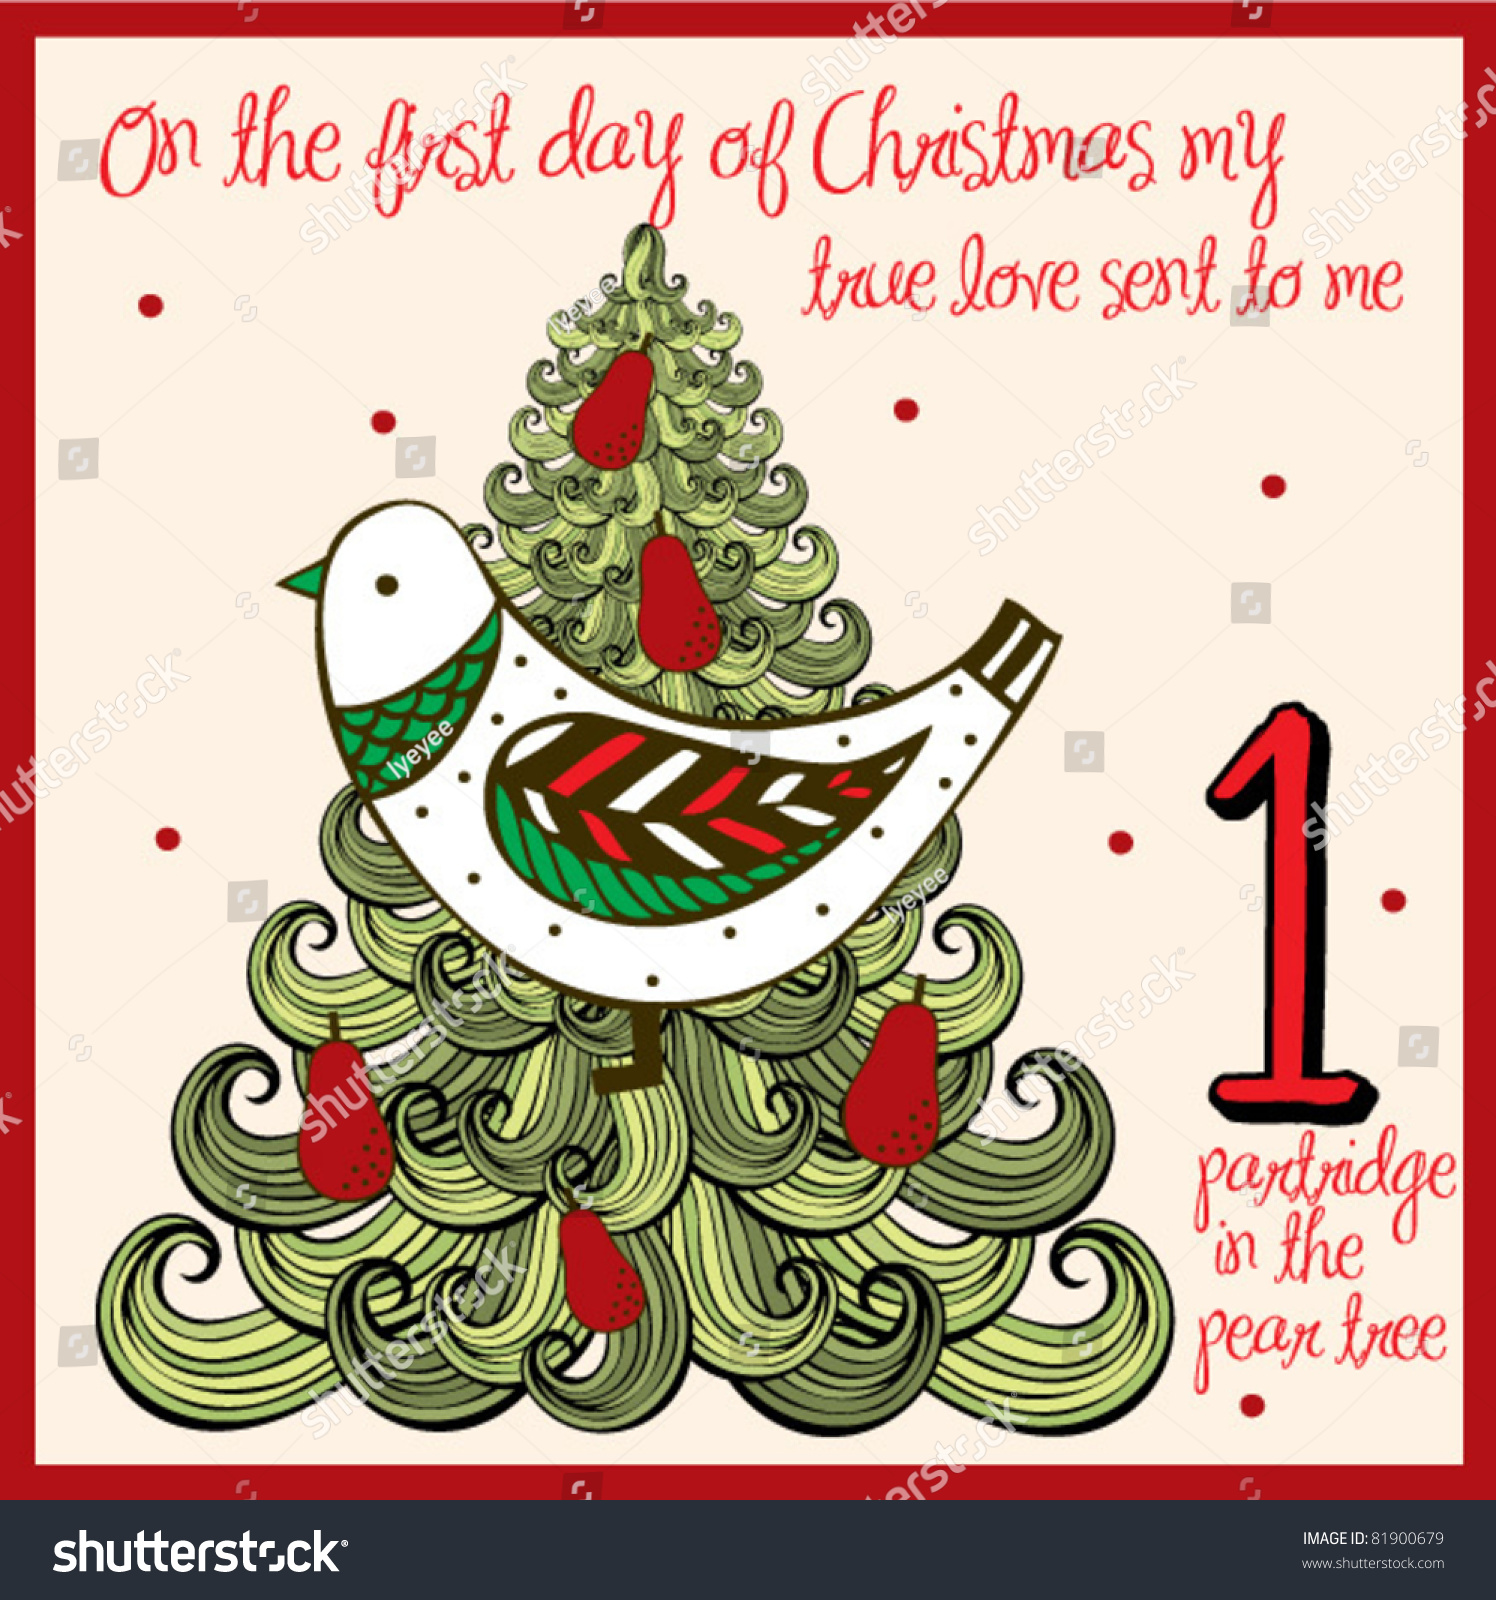 12 Days Of Christmas Partridge In A Pear Tree